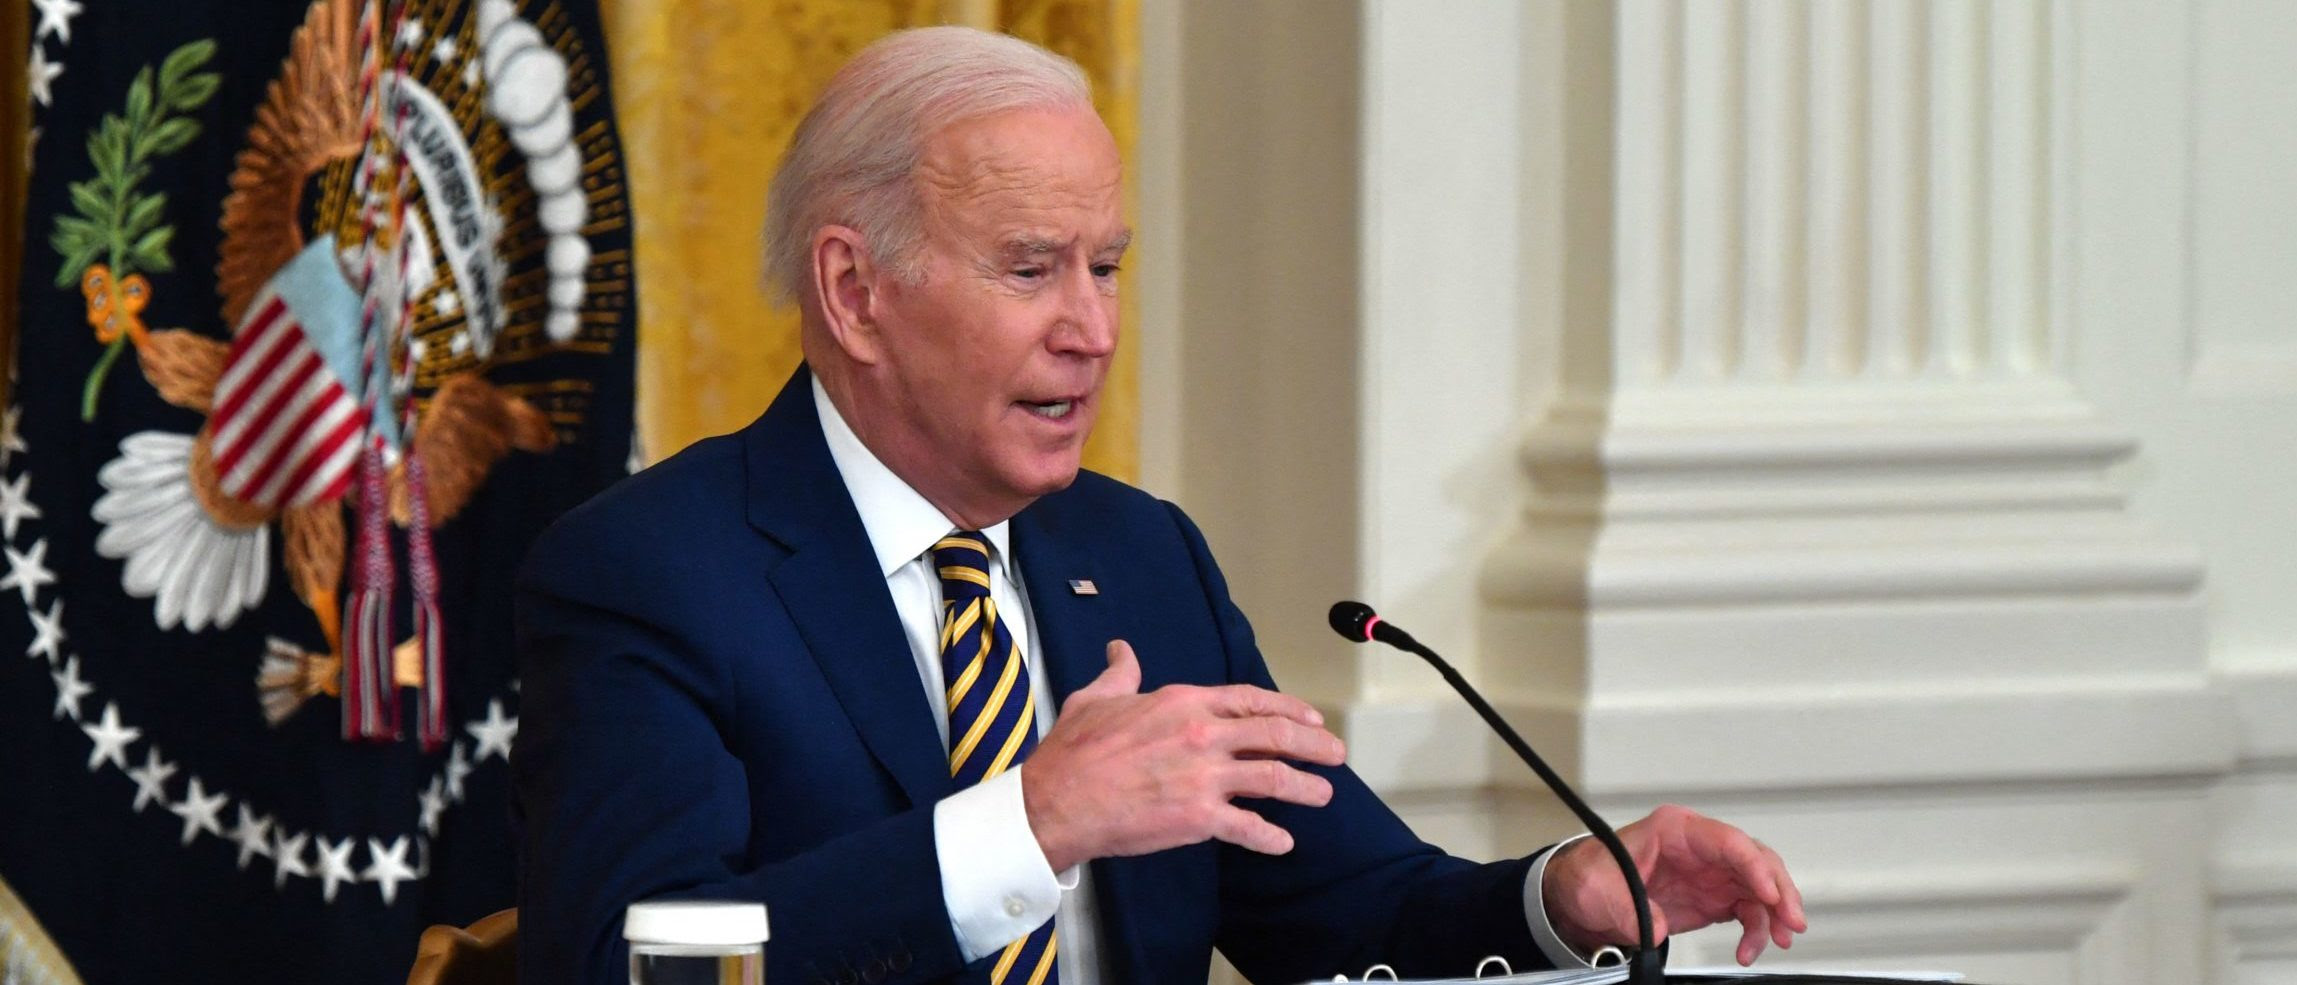 ‘Don’t Think About It’: White House Aide Warns Journalist Against Asking Biden Questions During Event